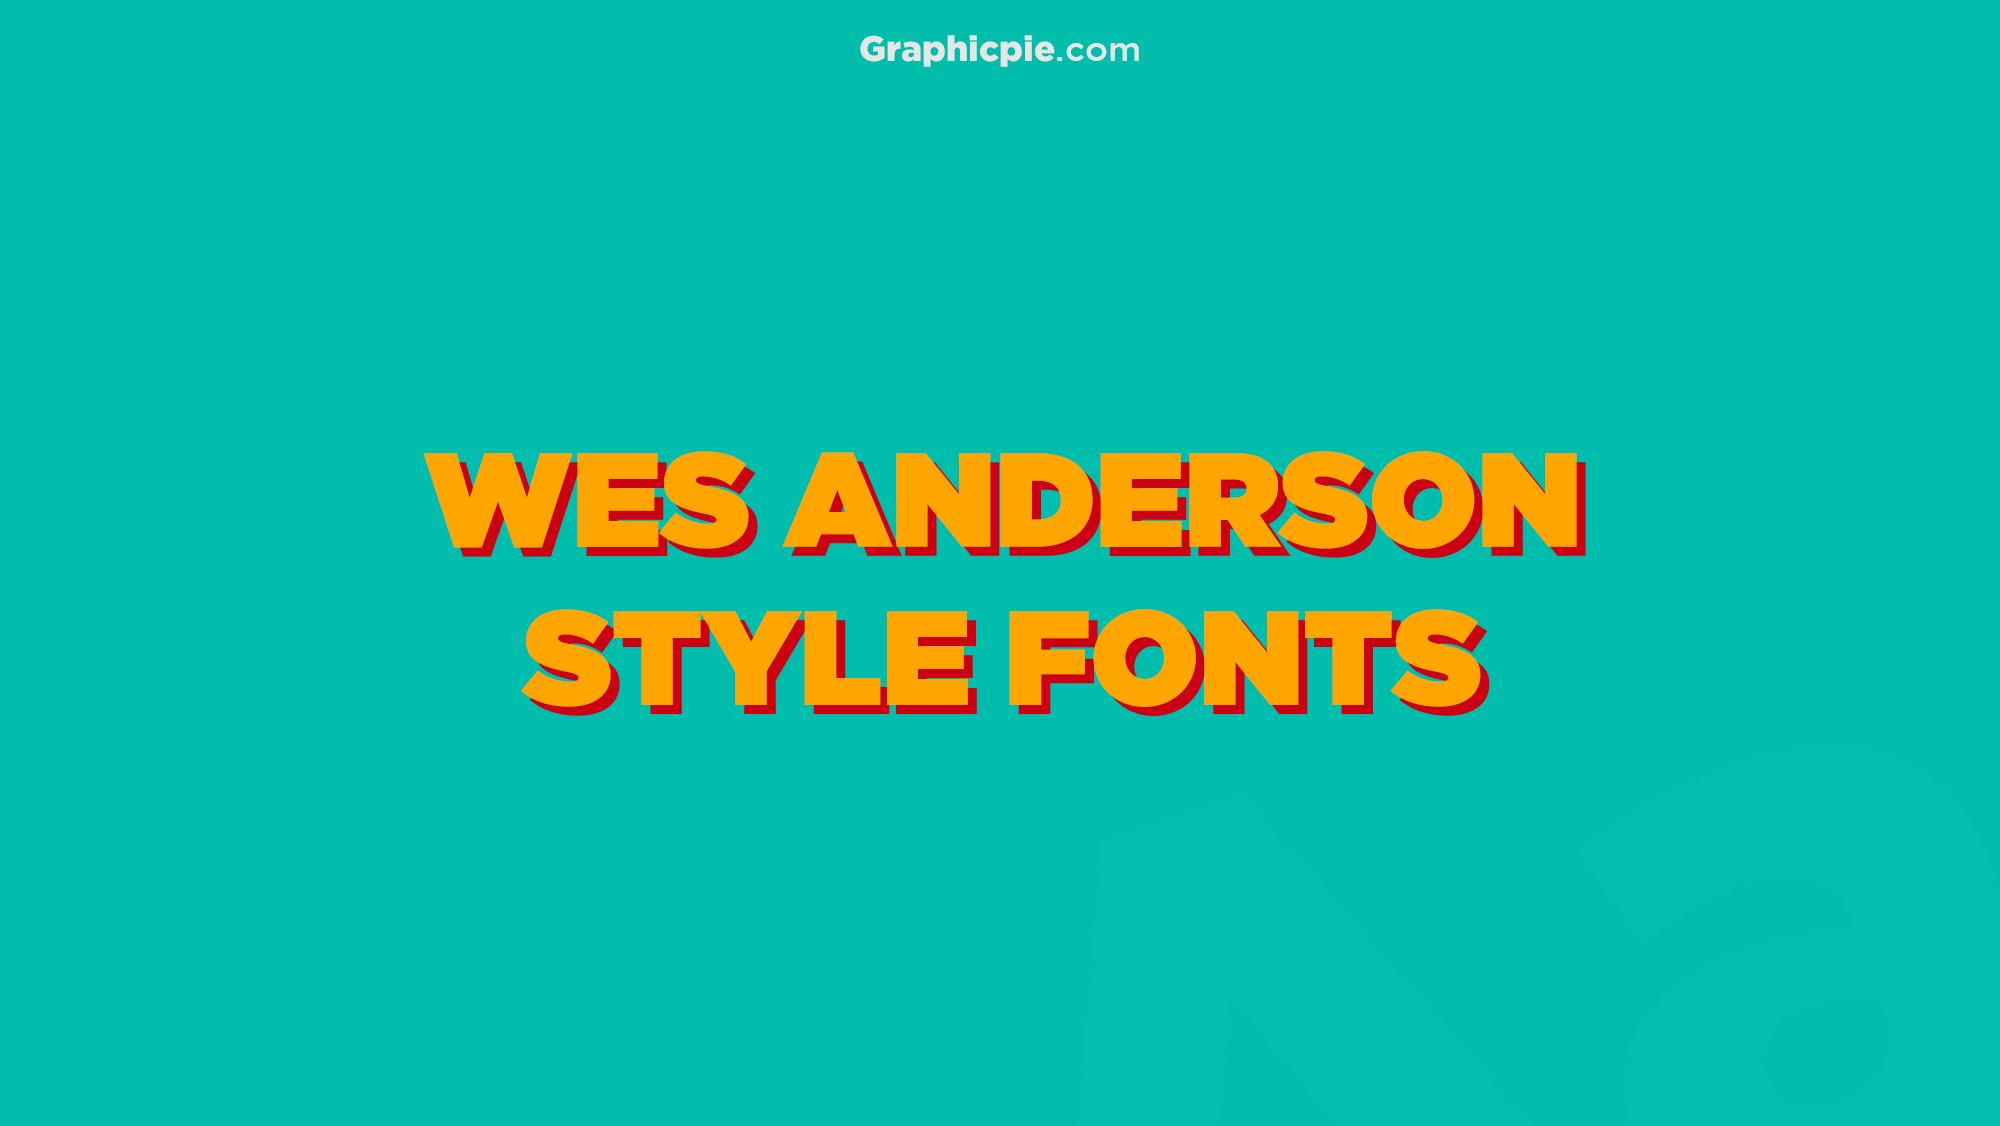 Wes Anderson Style Fonts: 11 Picks - Graphic Pie